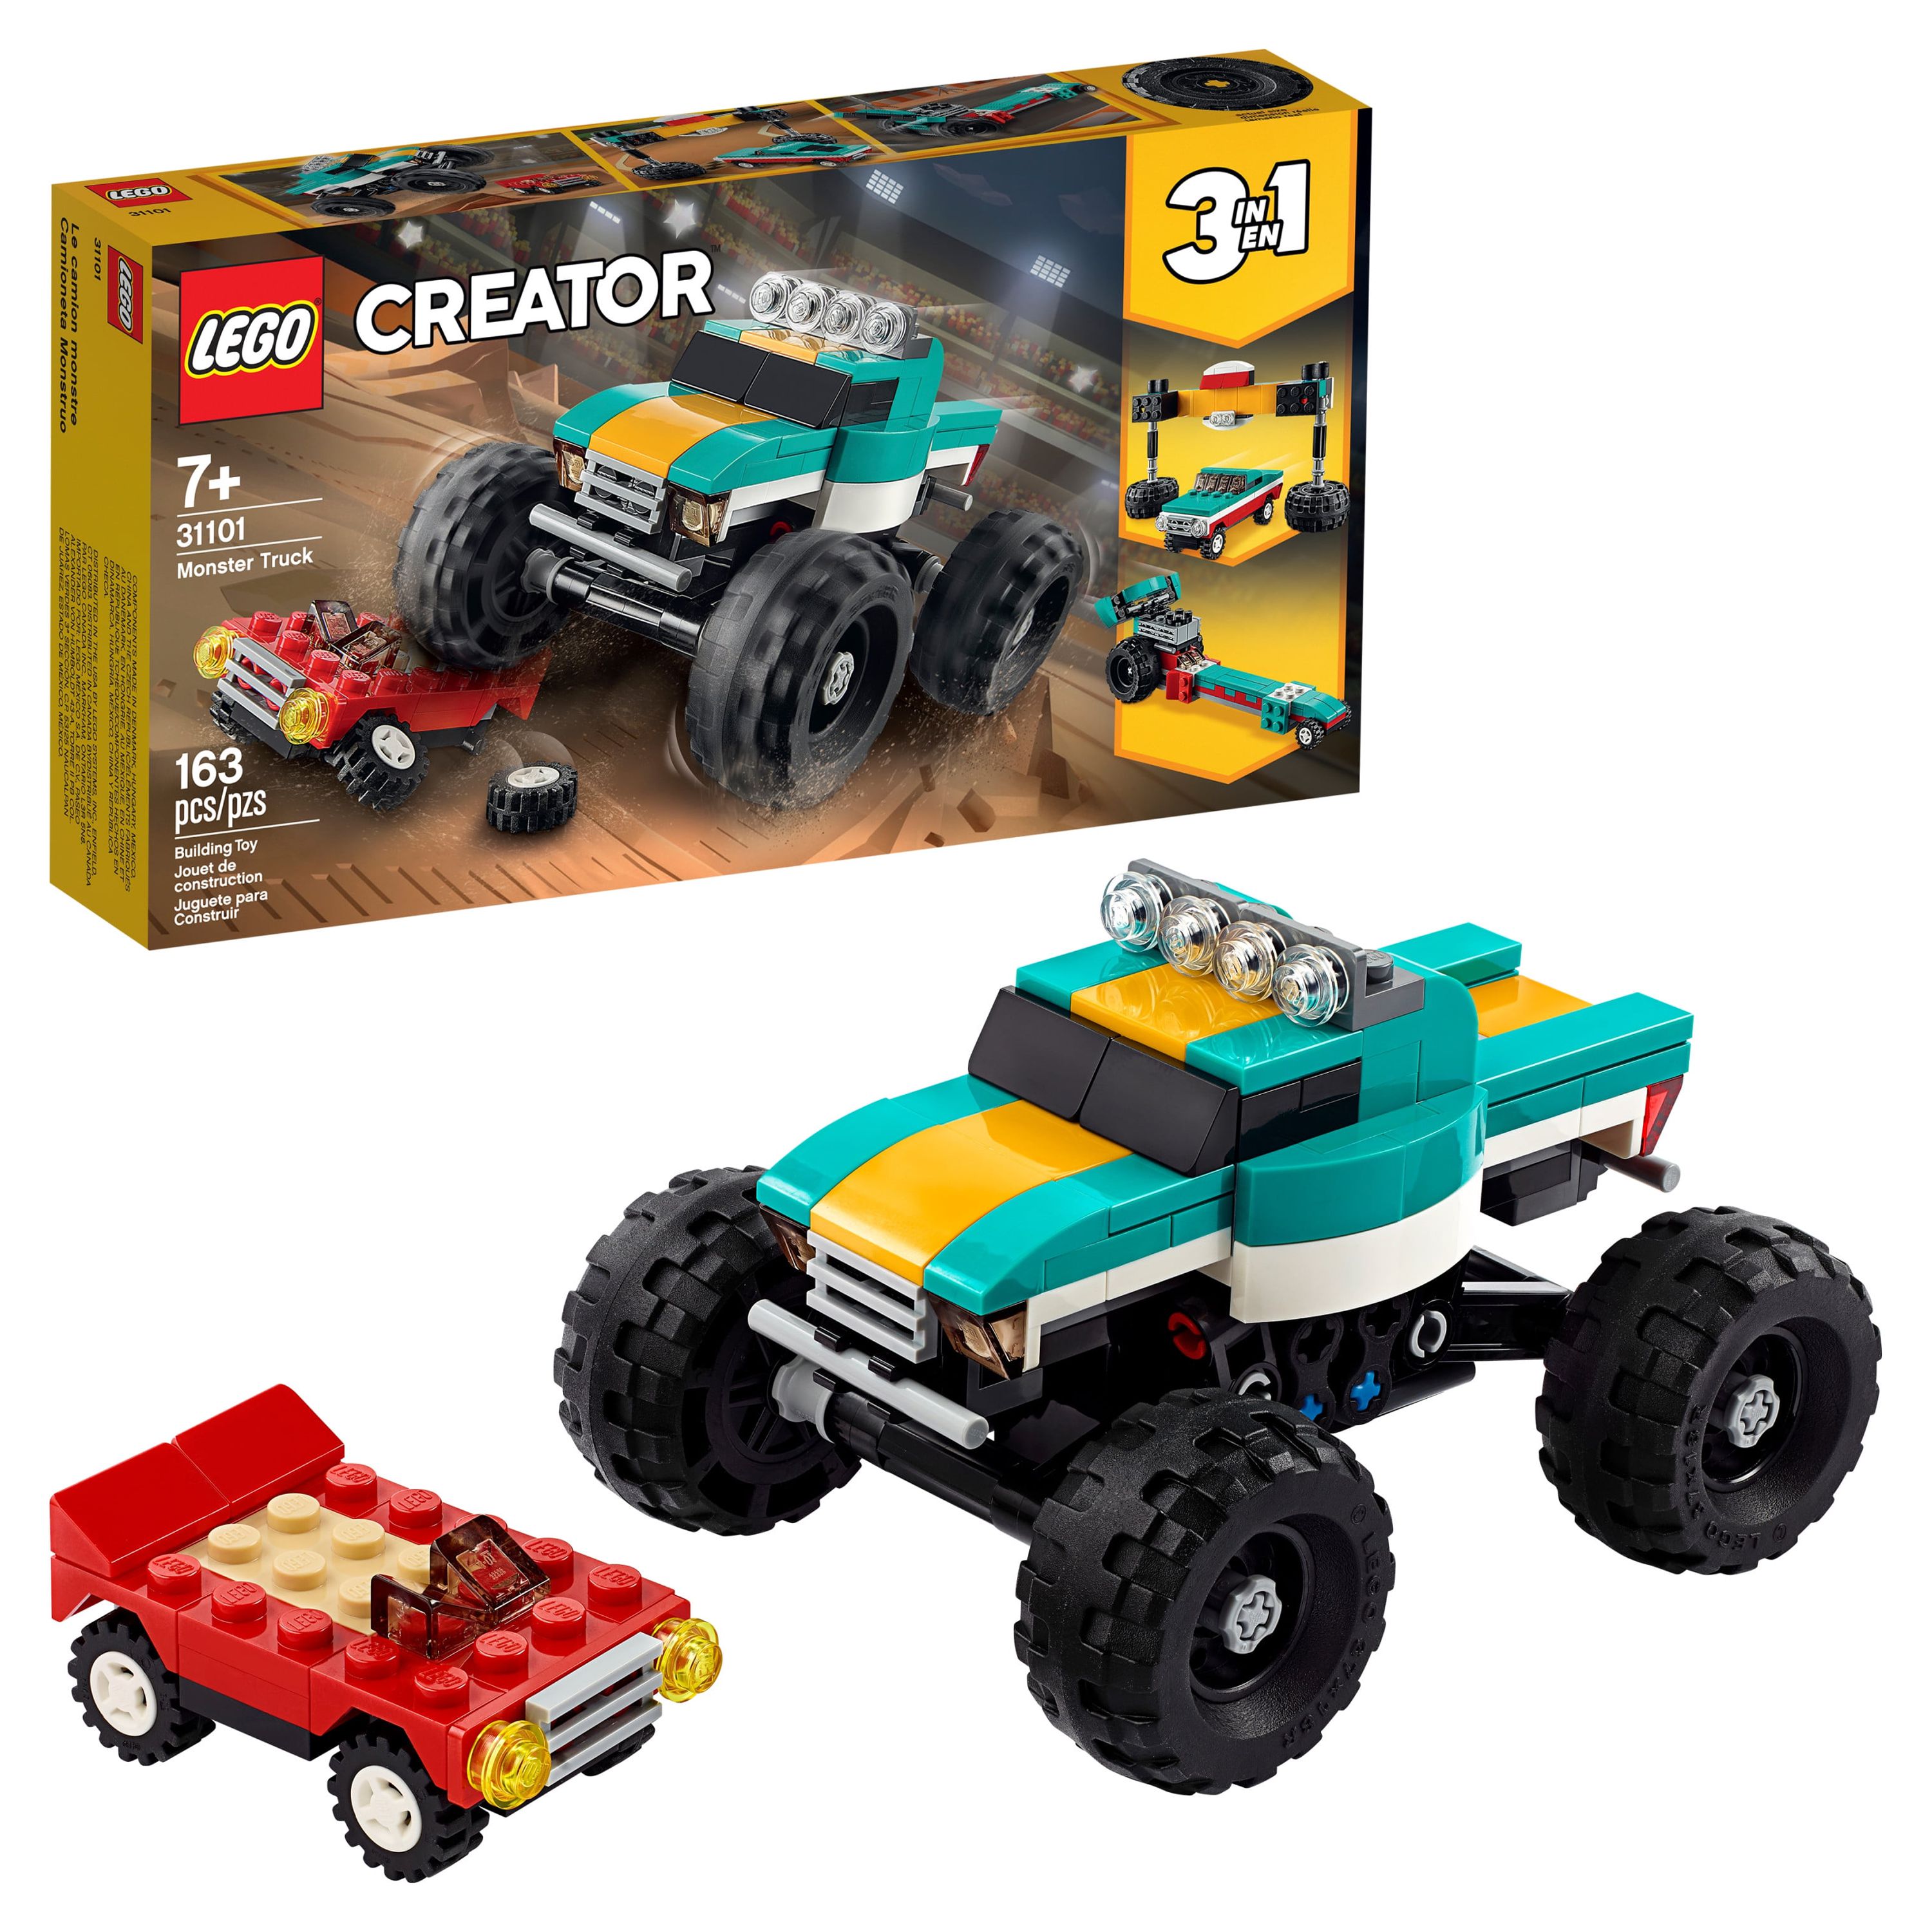 LEGO Creator 3in1 Monster Truck Toy 31101 Cool Building Kit for Kids (163 Pieces) - image 1 of 11